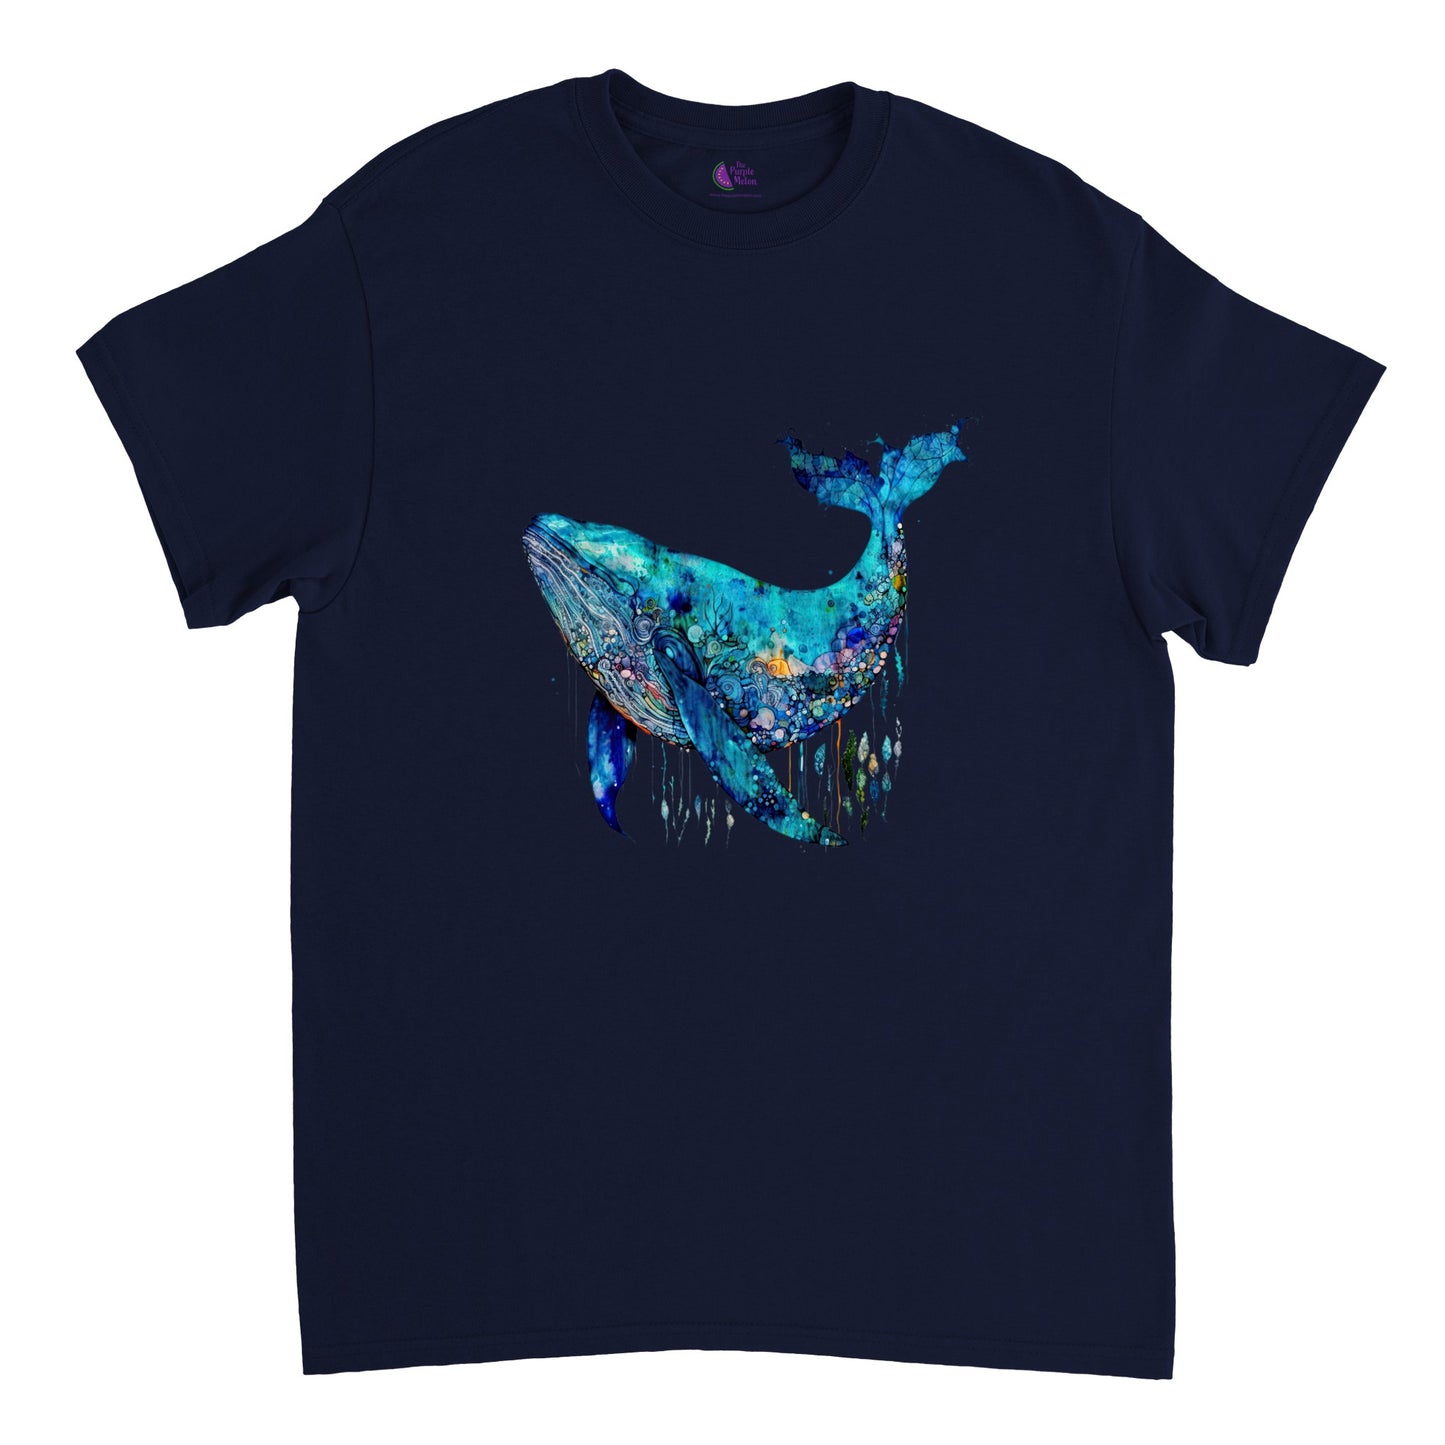 Navy blue t-shirt with a blue whale print